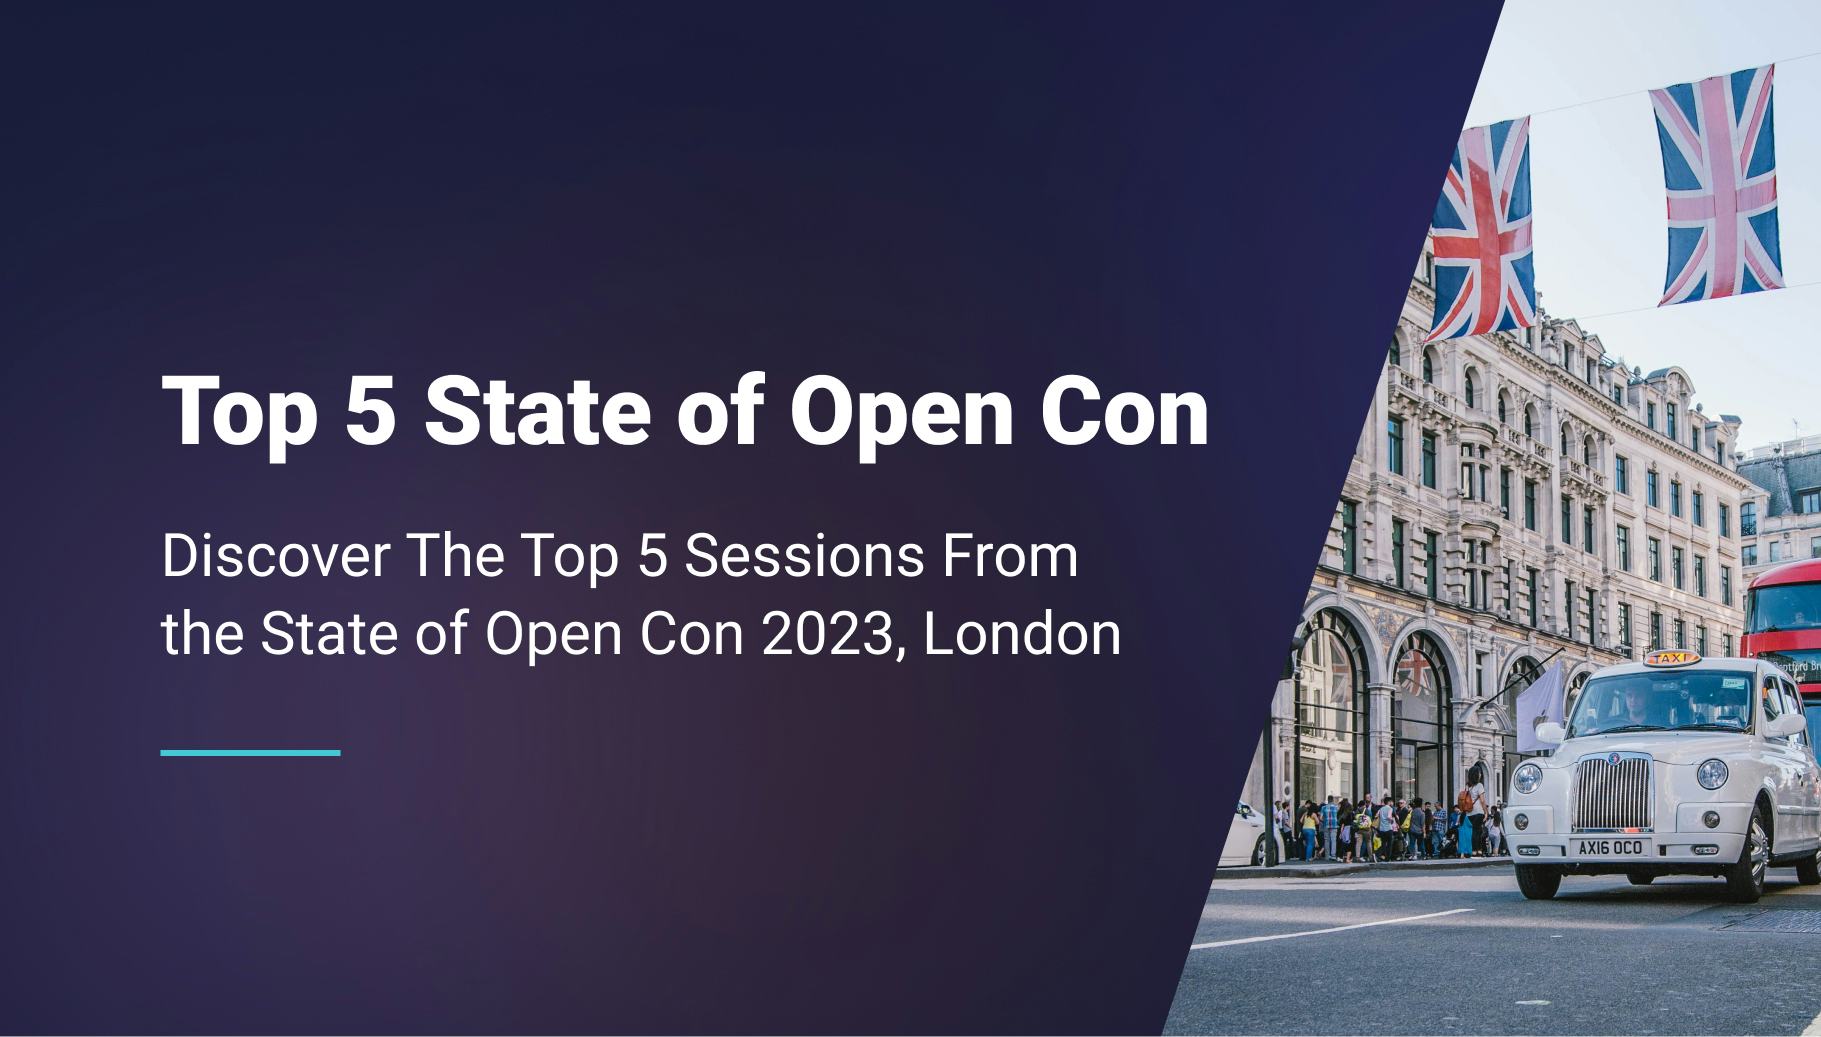 State of Open Con 2023 - My Top 5 Sessions  - Qovery